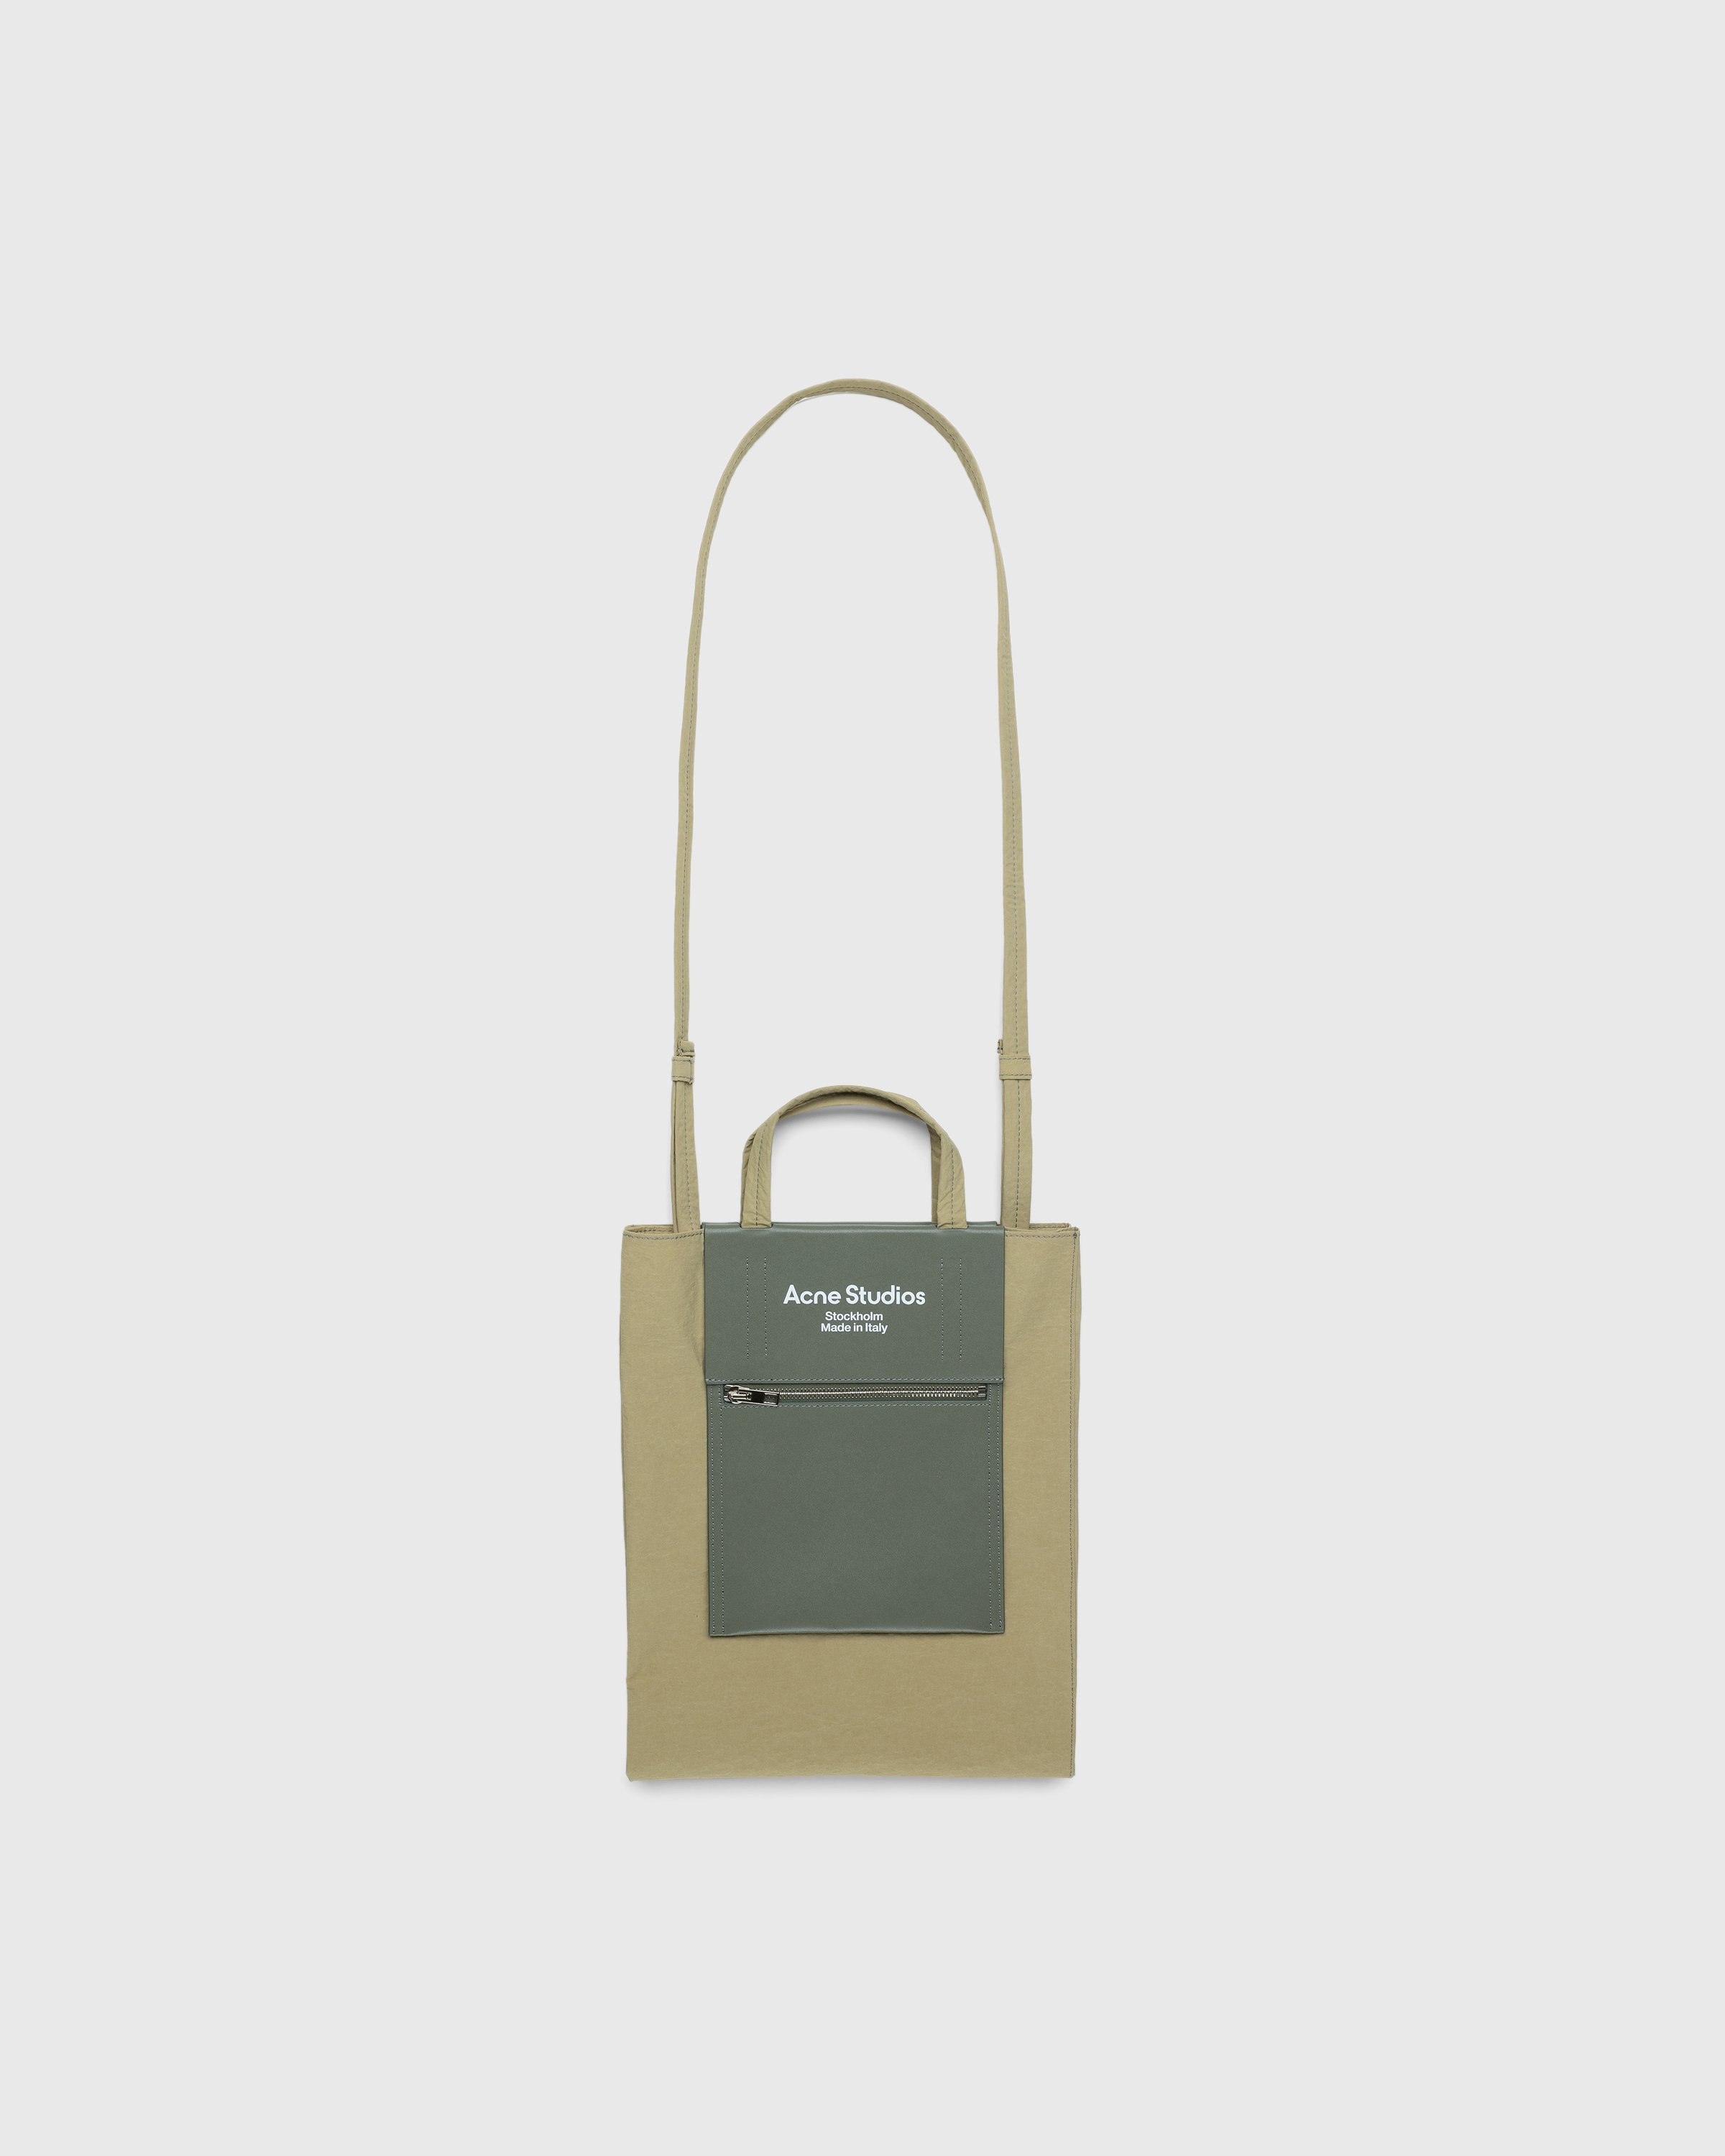 Acne Studios - Recycled Nylon Tote Bag Olive Green - Accessories - Beige - Image 1